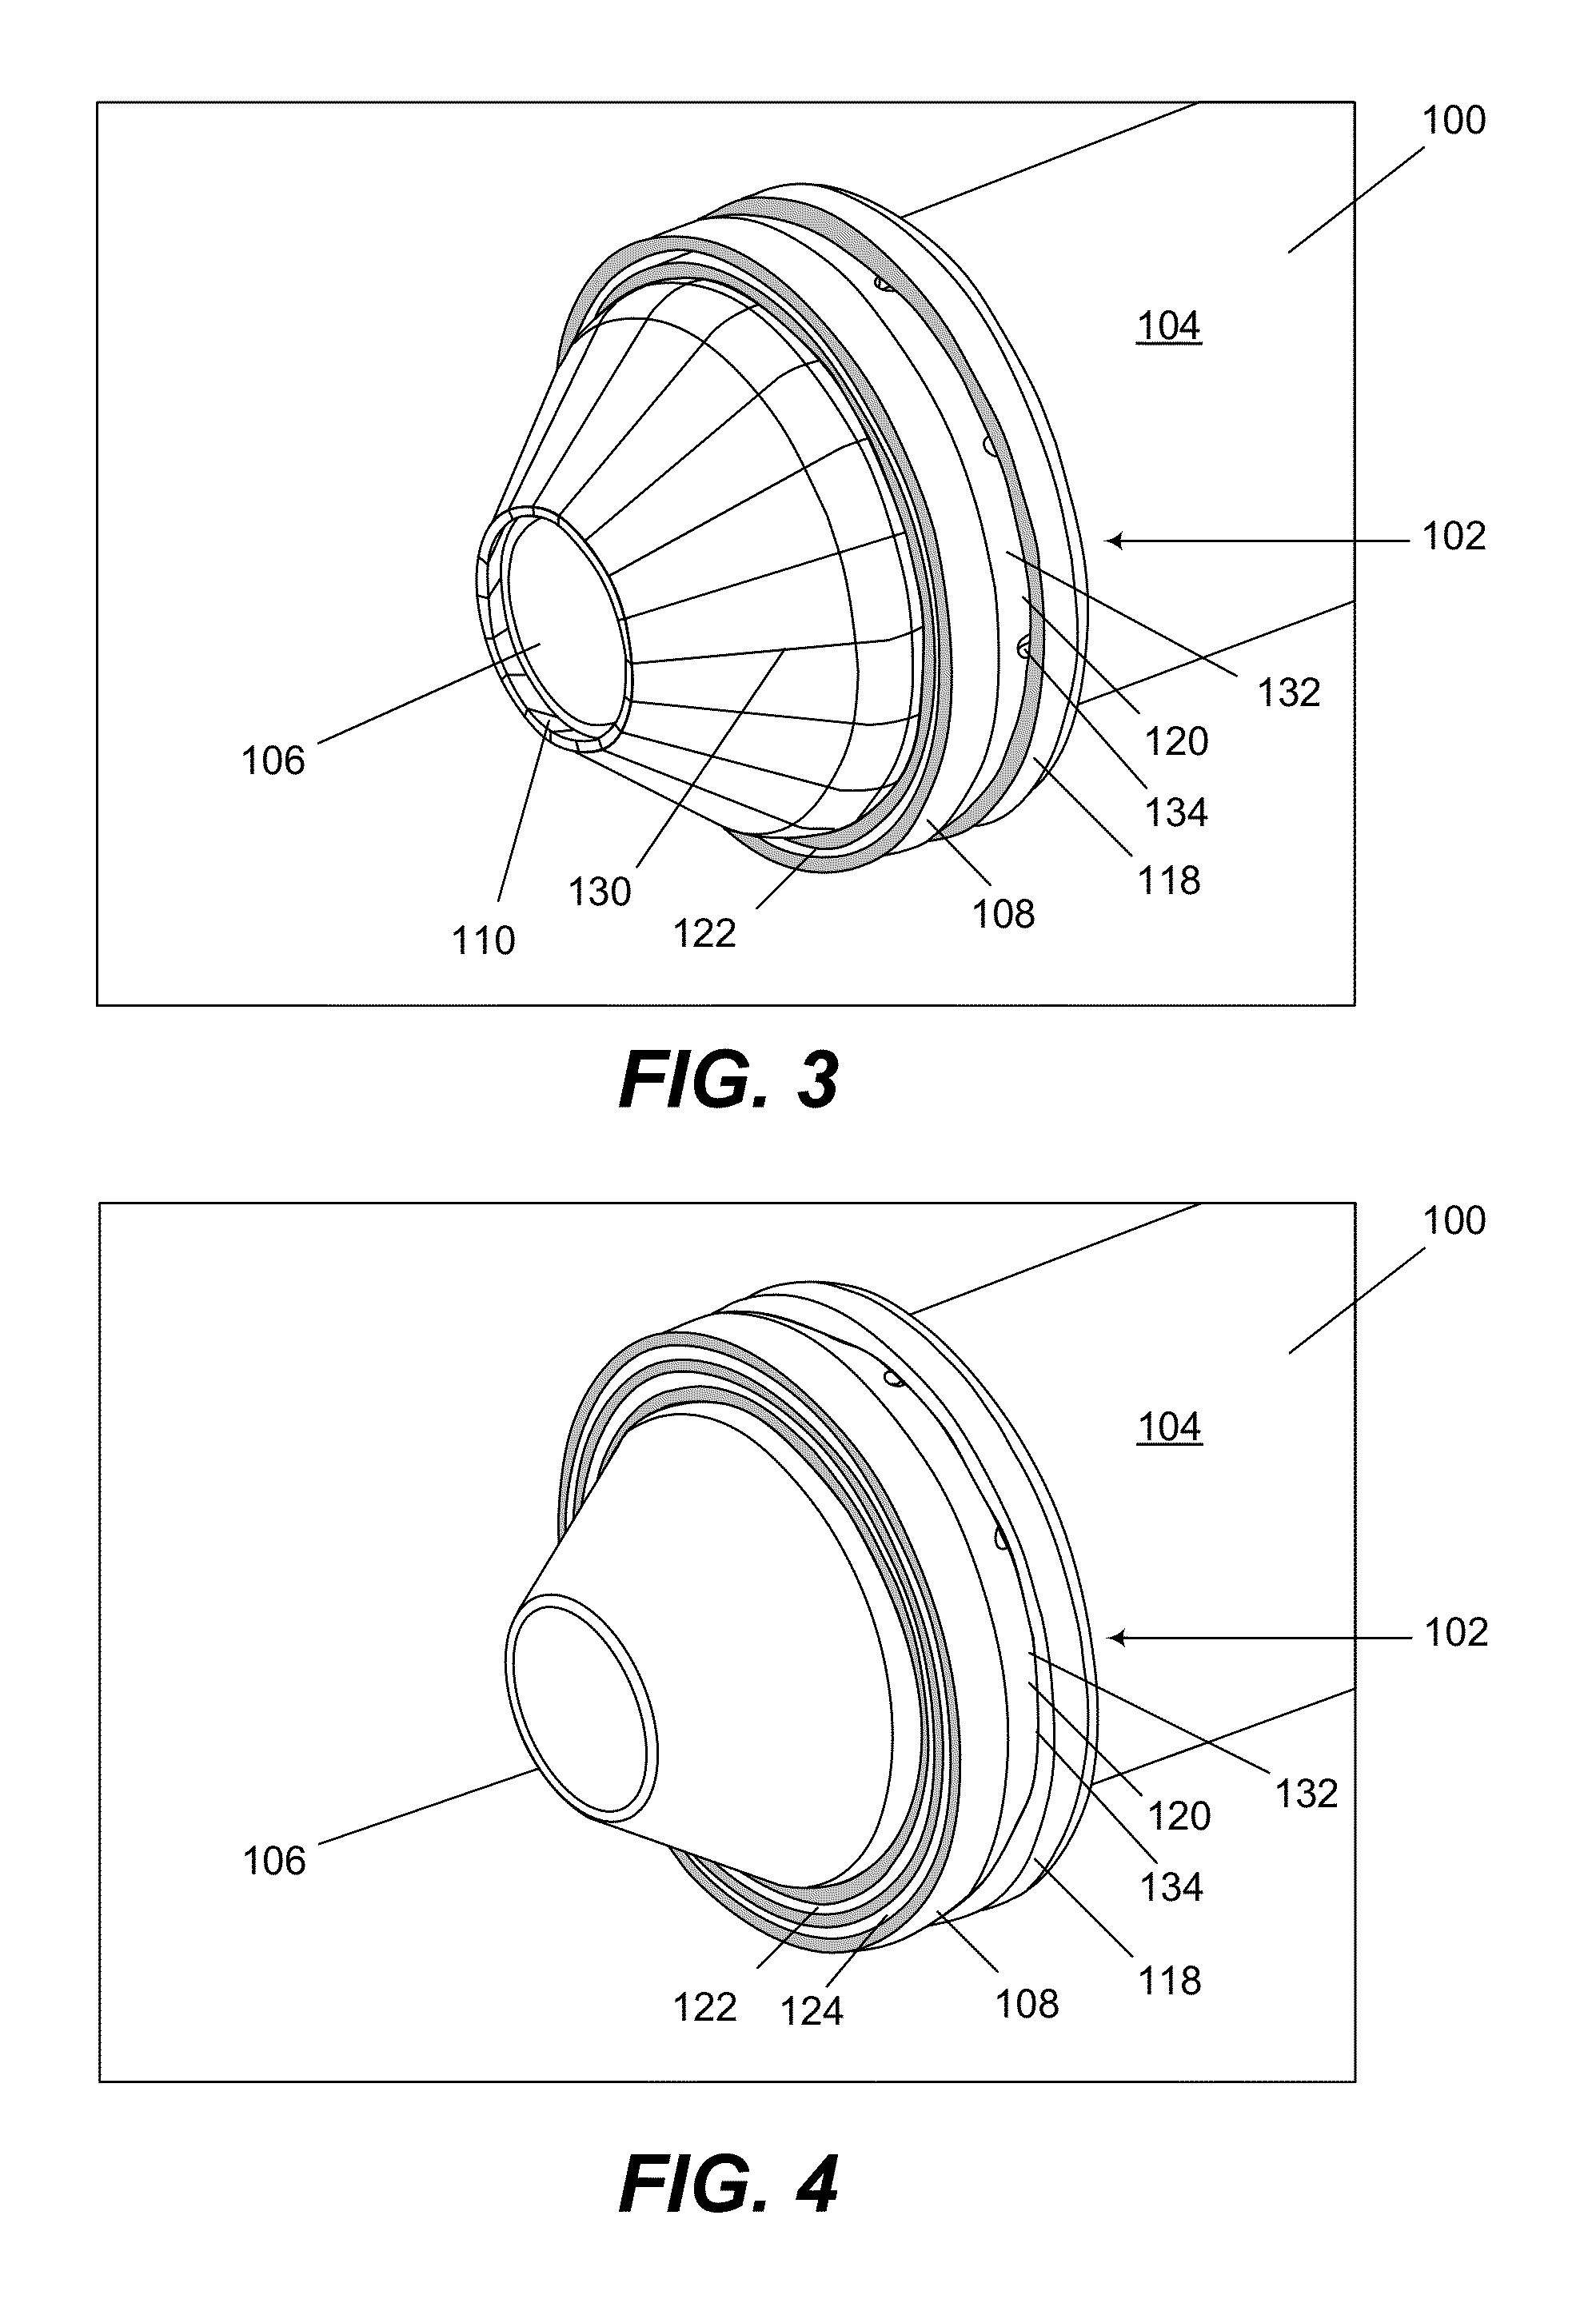 Methods and apparatus for providing a sacrificial shield for a fuel injector